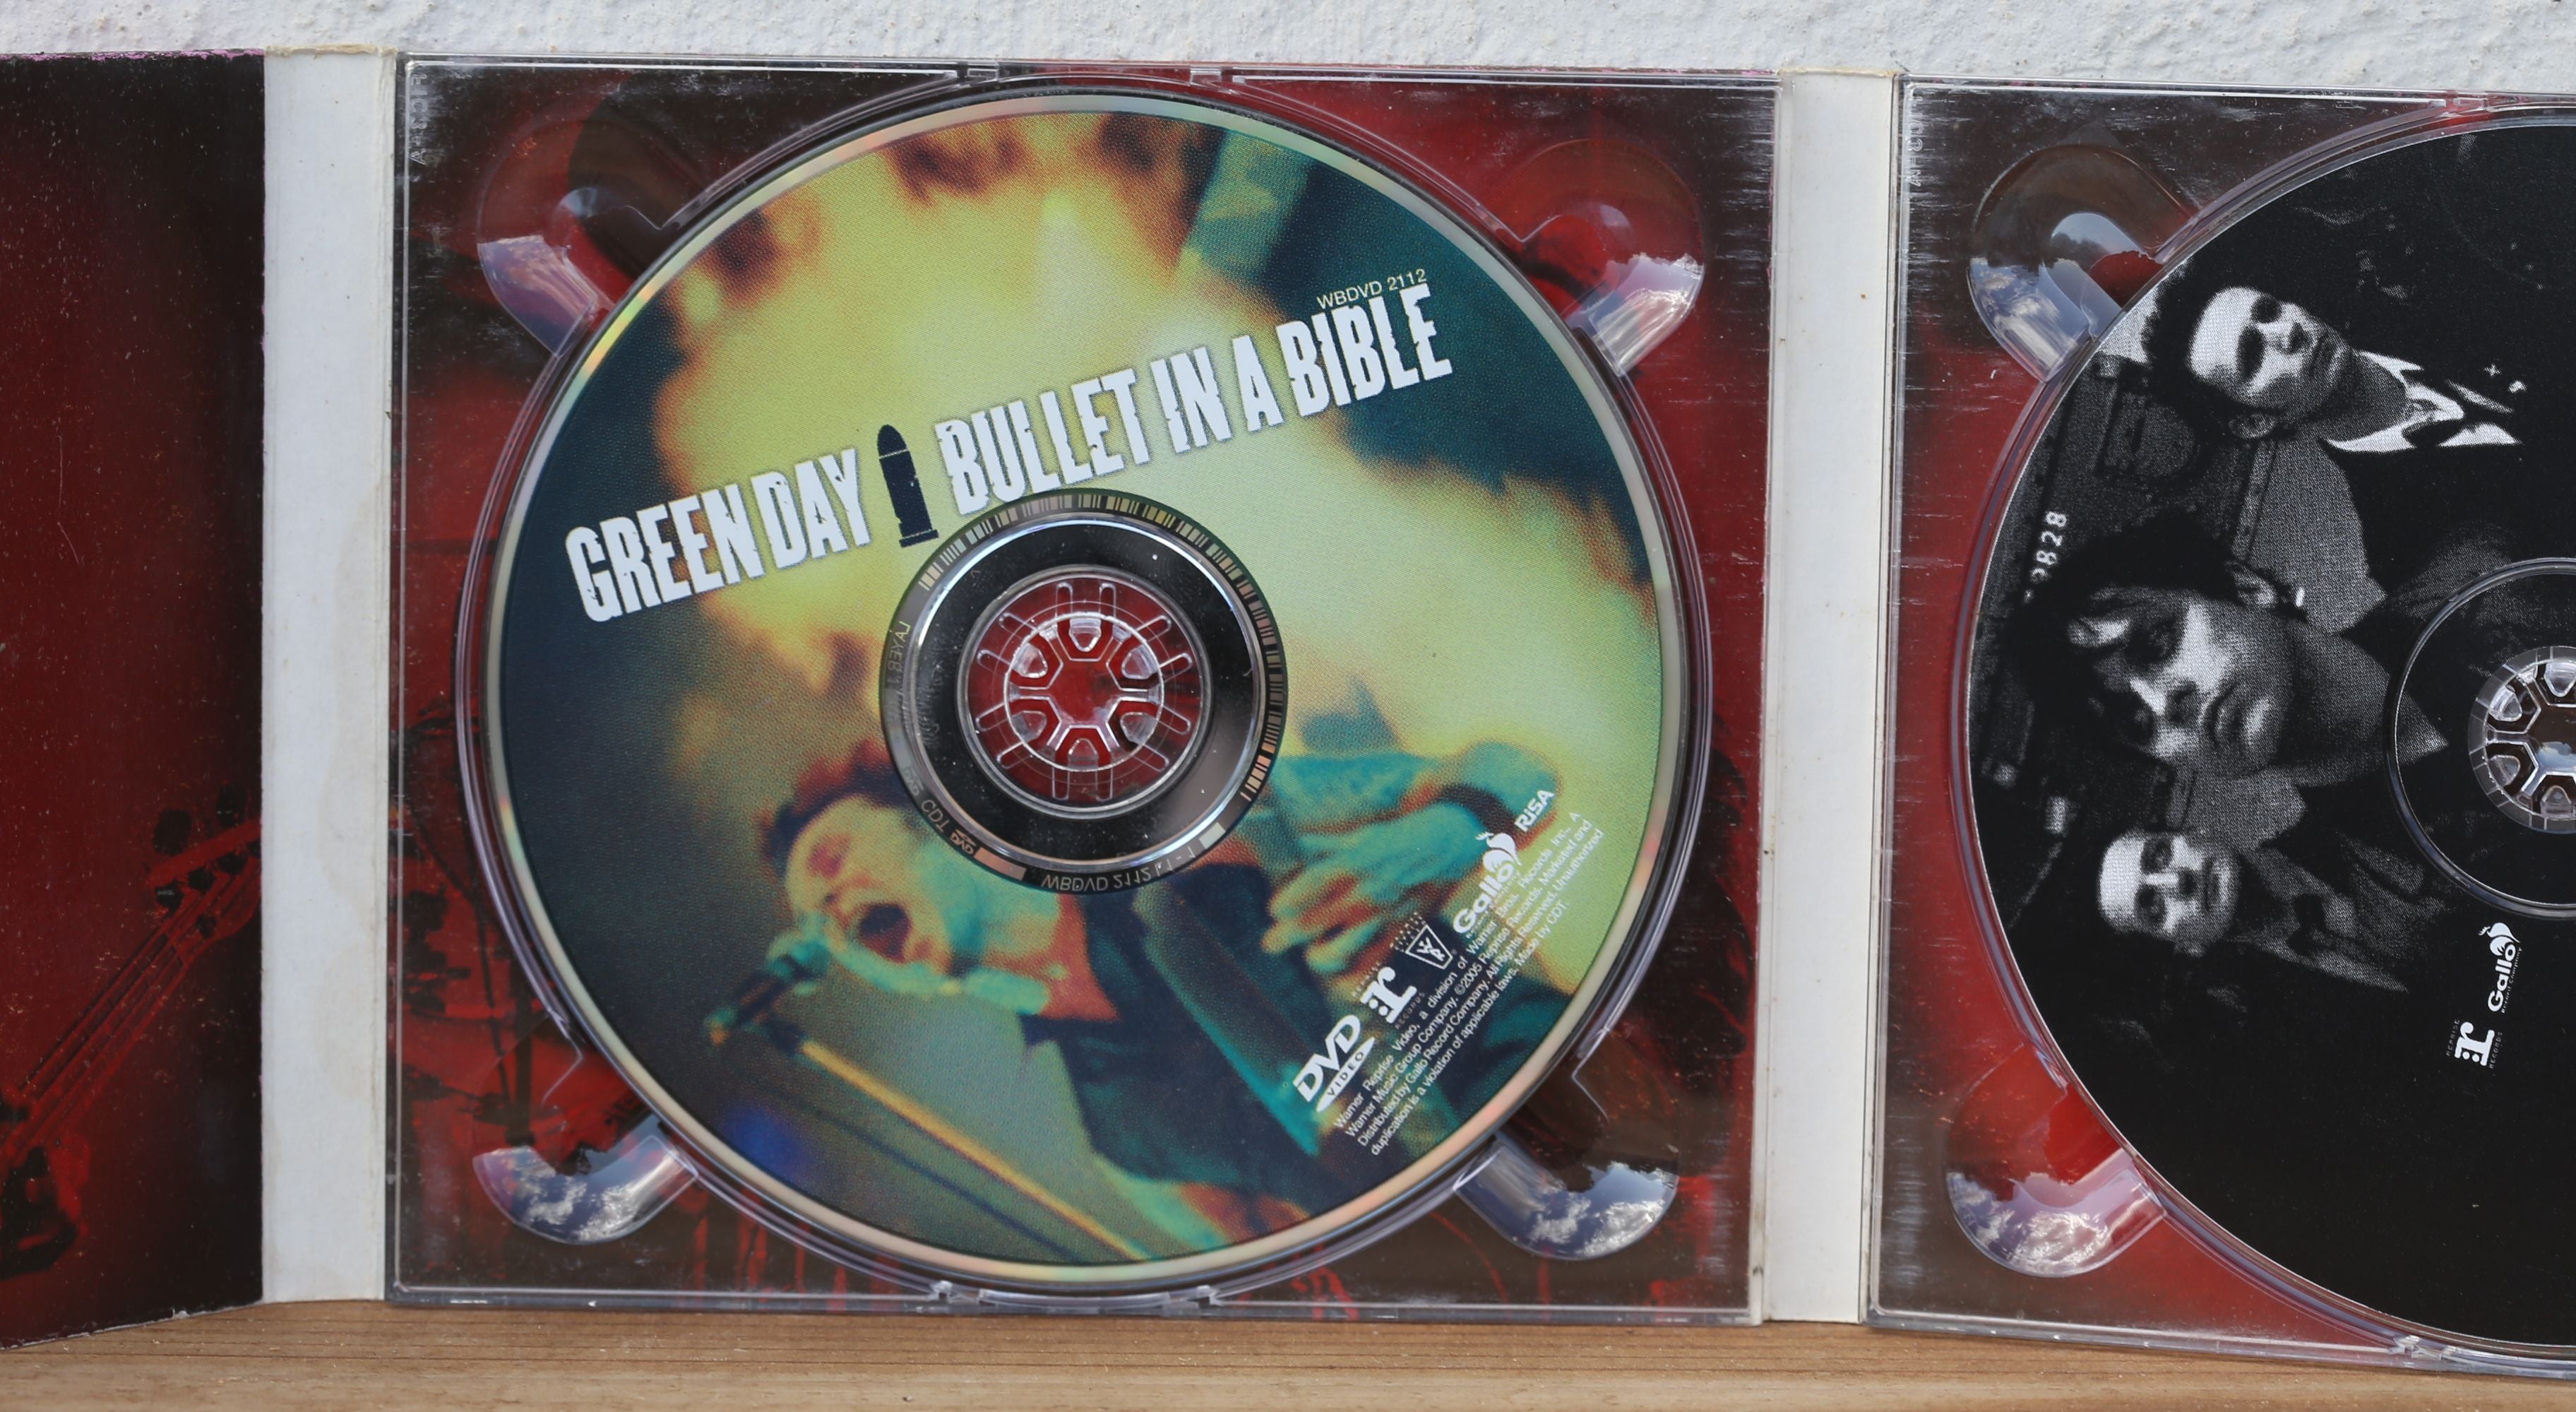 Green Day - Bullet in a bible (2-disc cd/dvd combo)